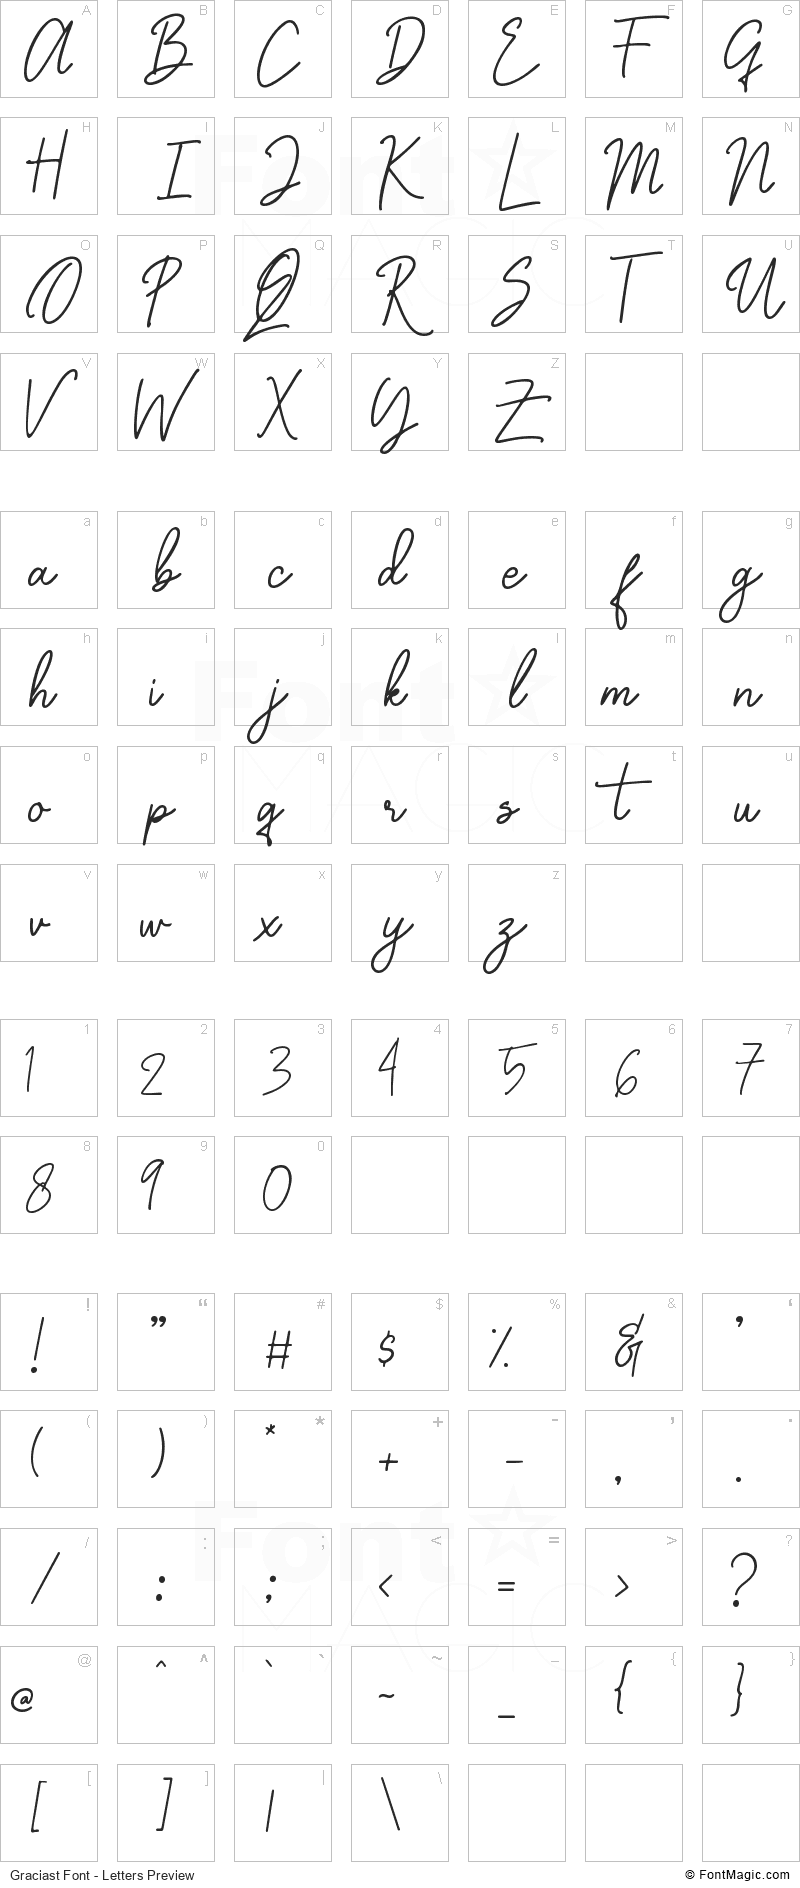 Graciast Font - All Latters Preview Chart